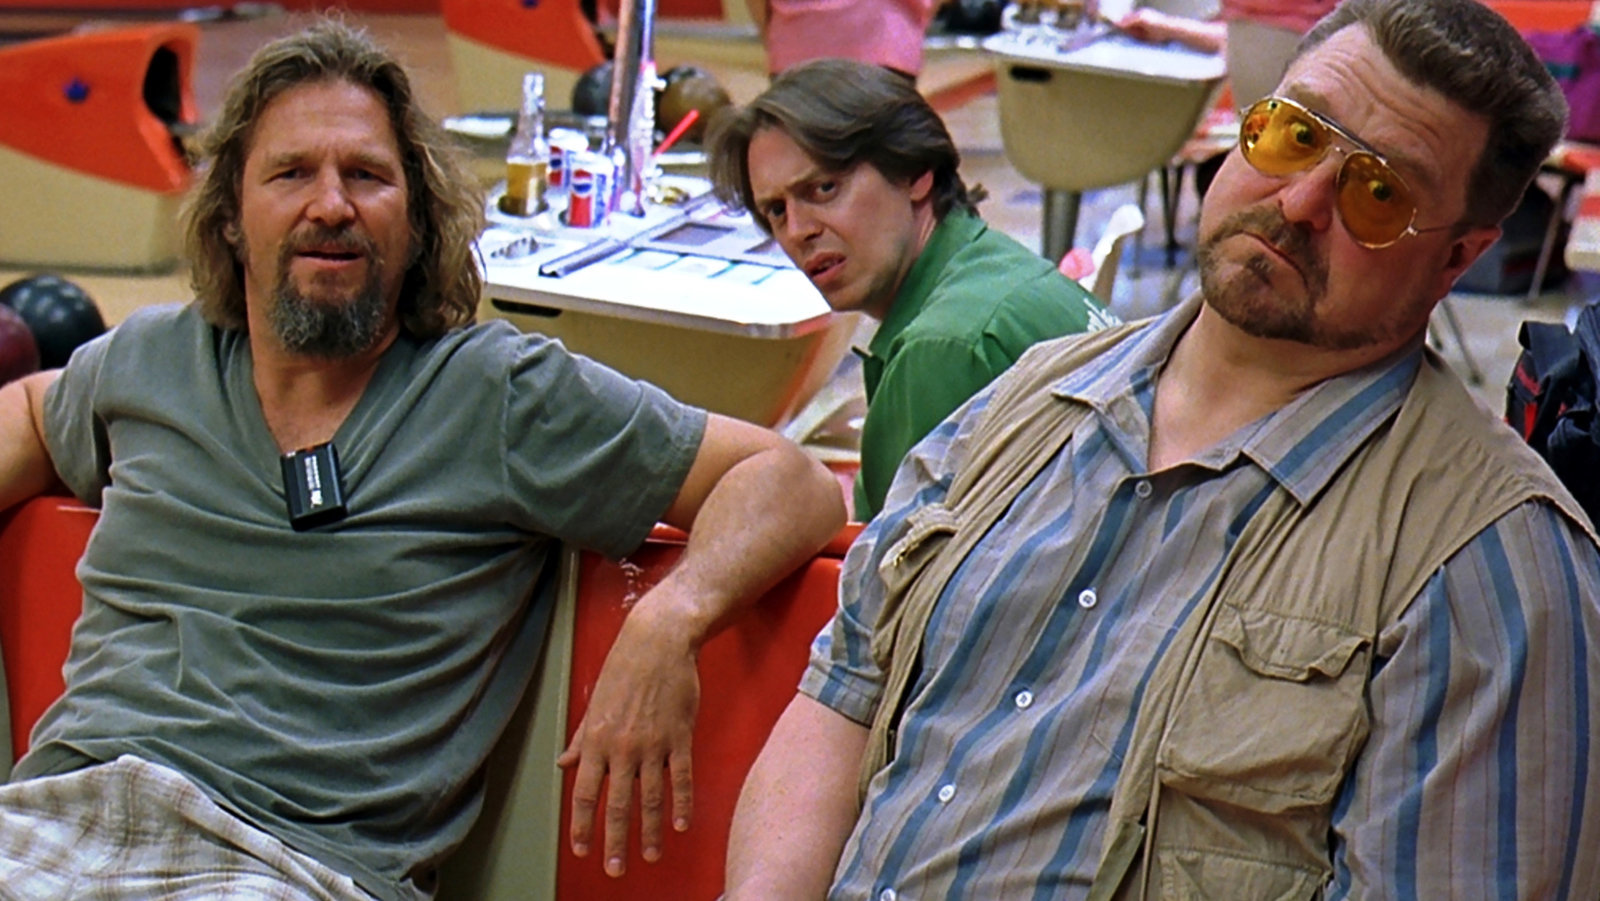 A scene from The Big Lebowski depicts three of its main characters sitting in a bowling alley